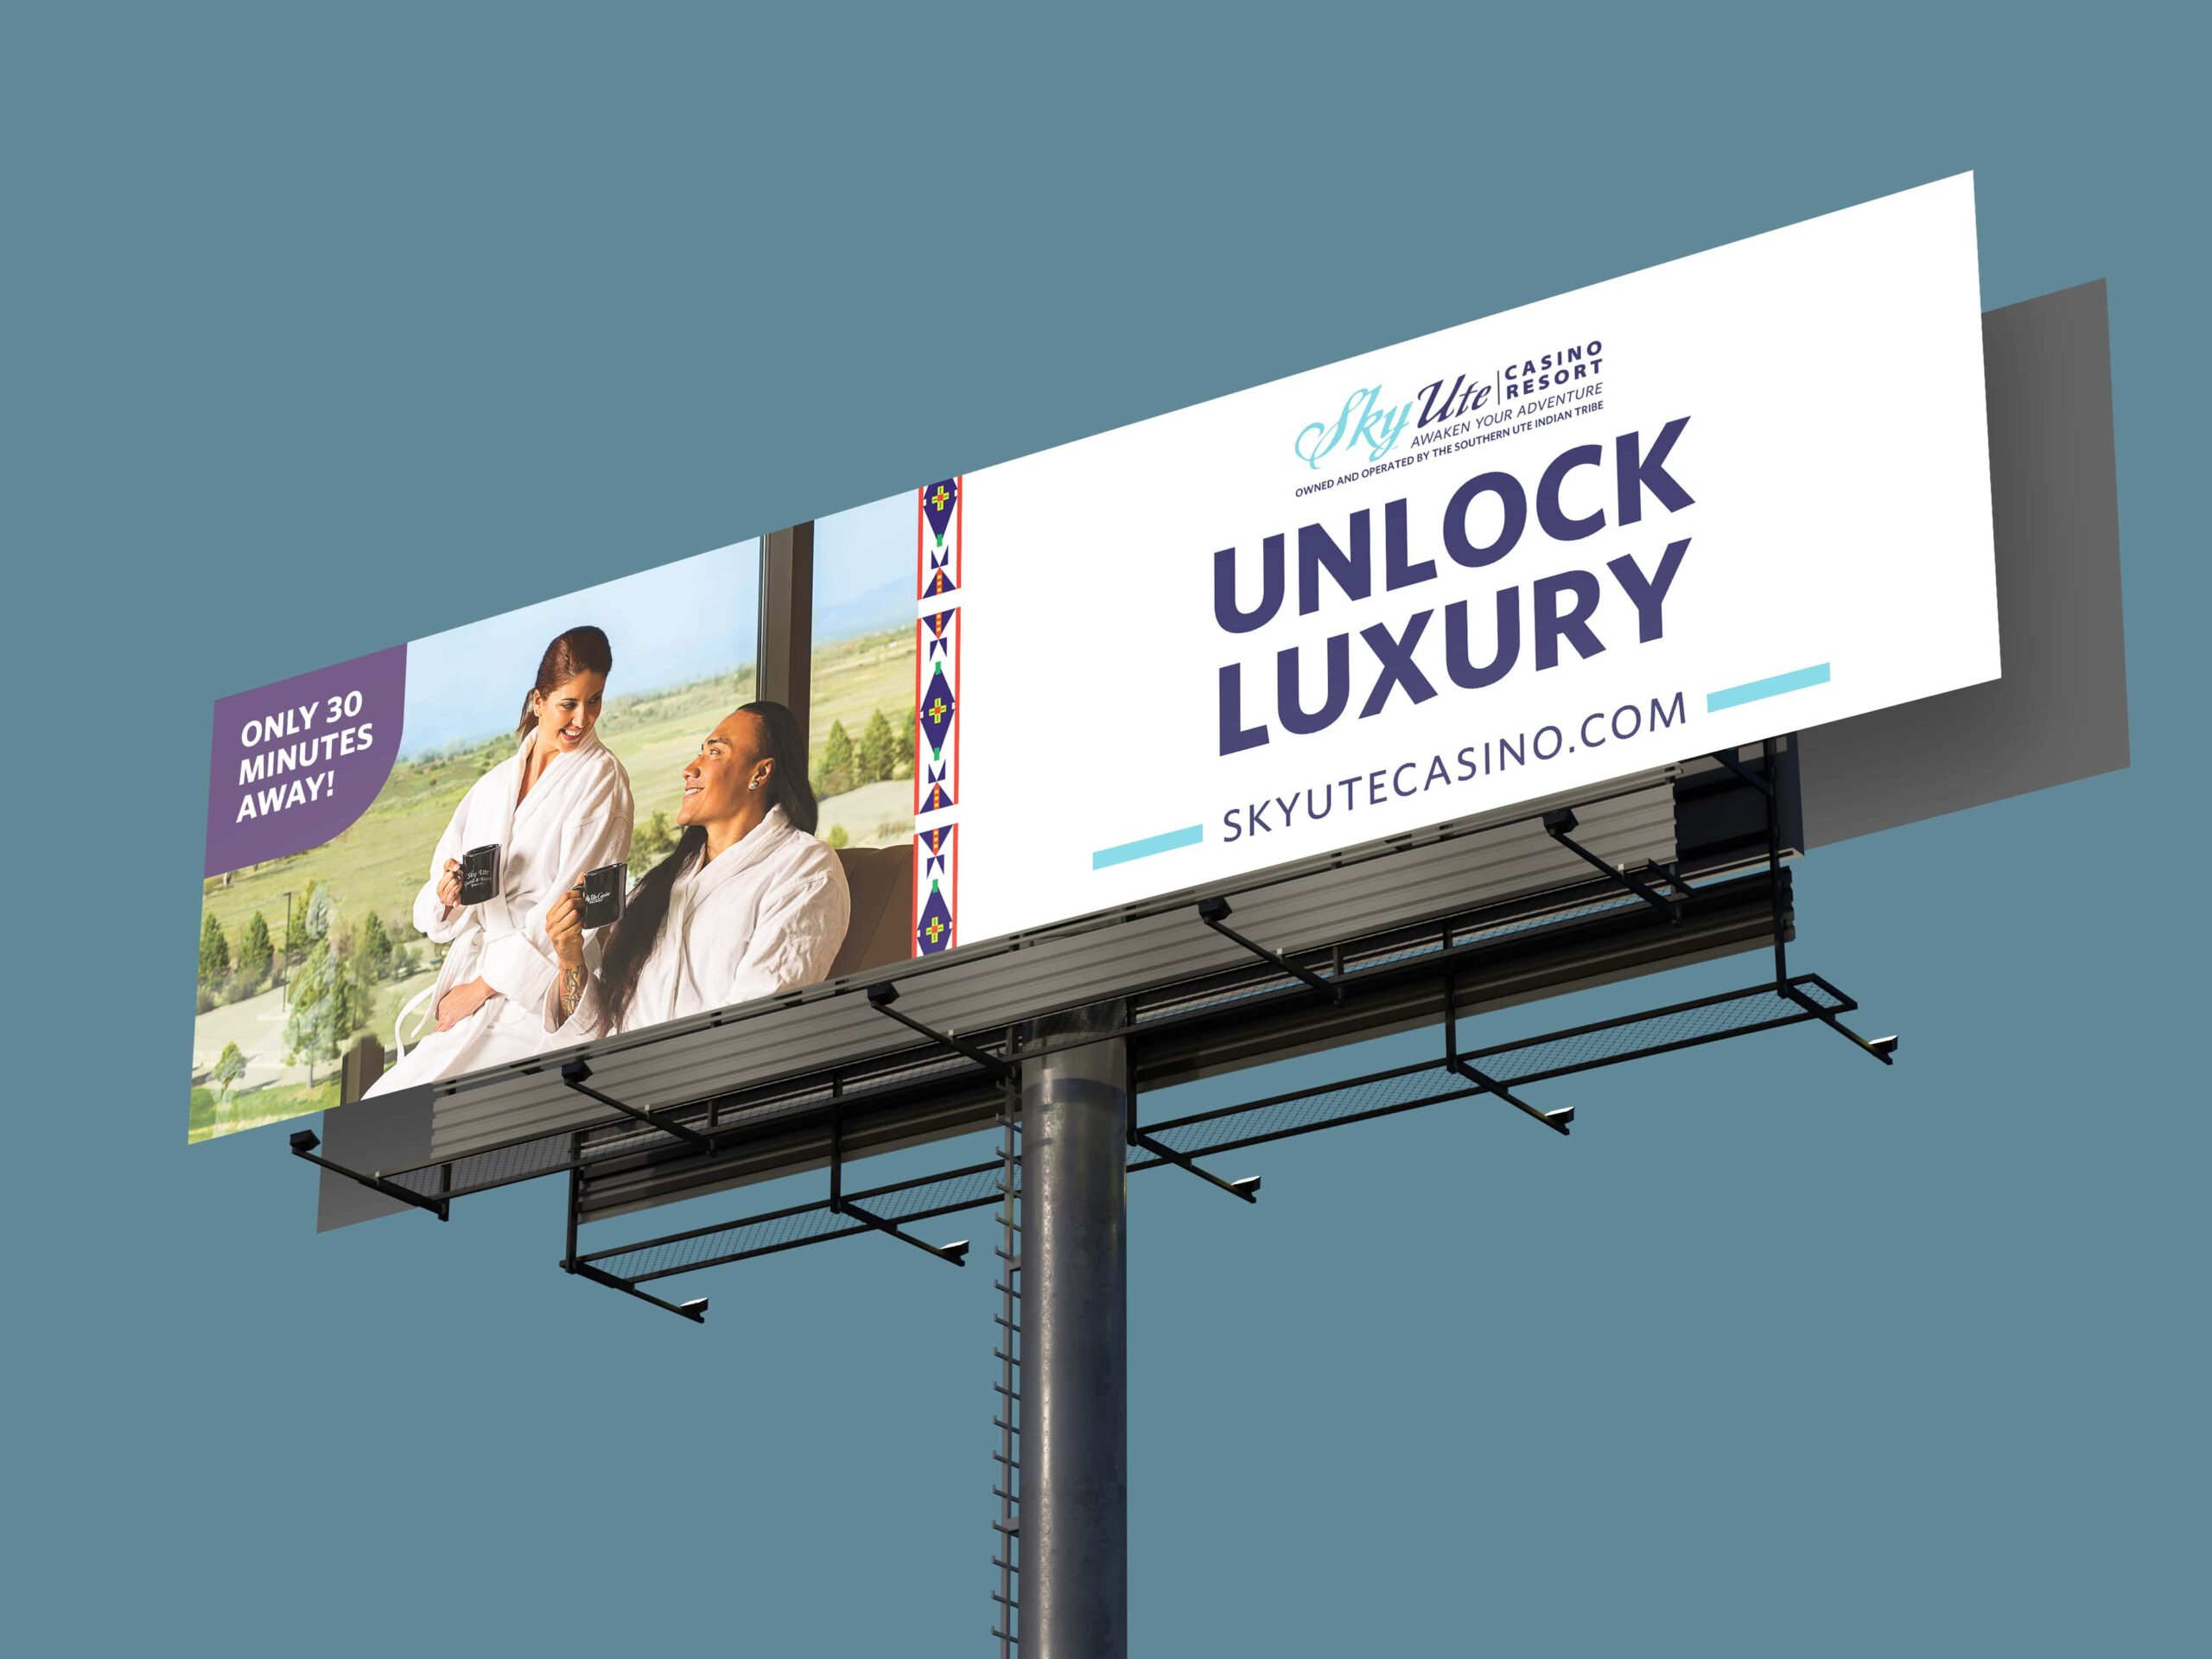 billboard mockup for sky ute casino with two people in robes on it